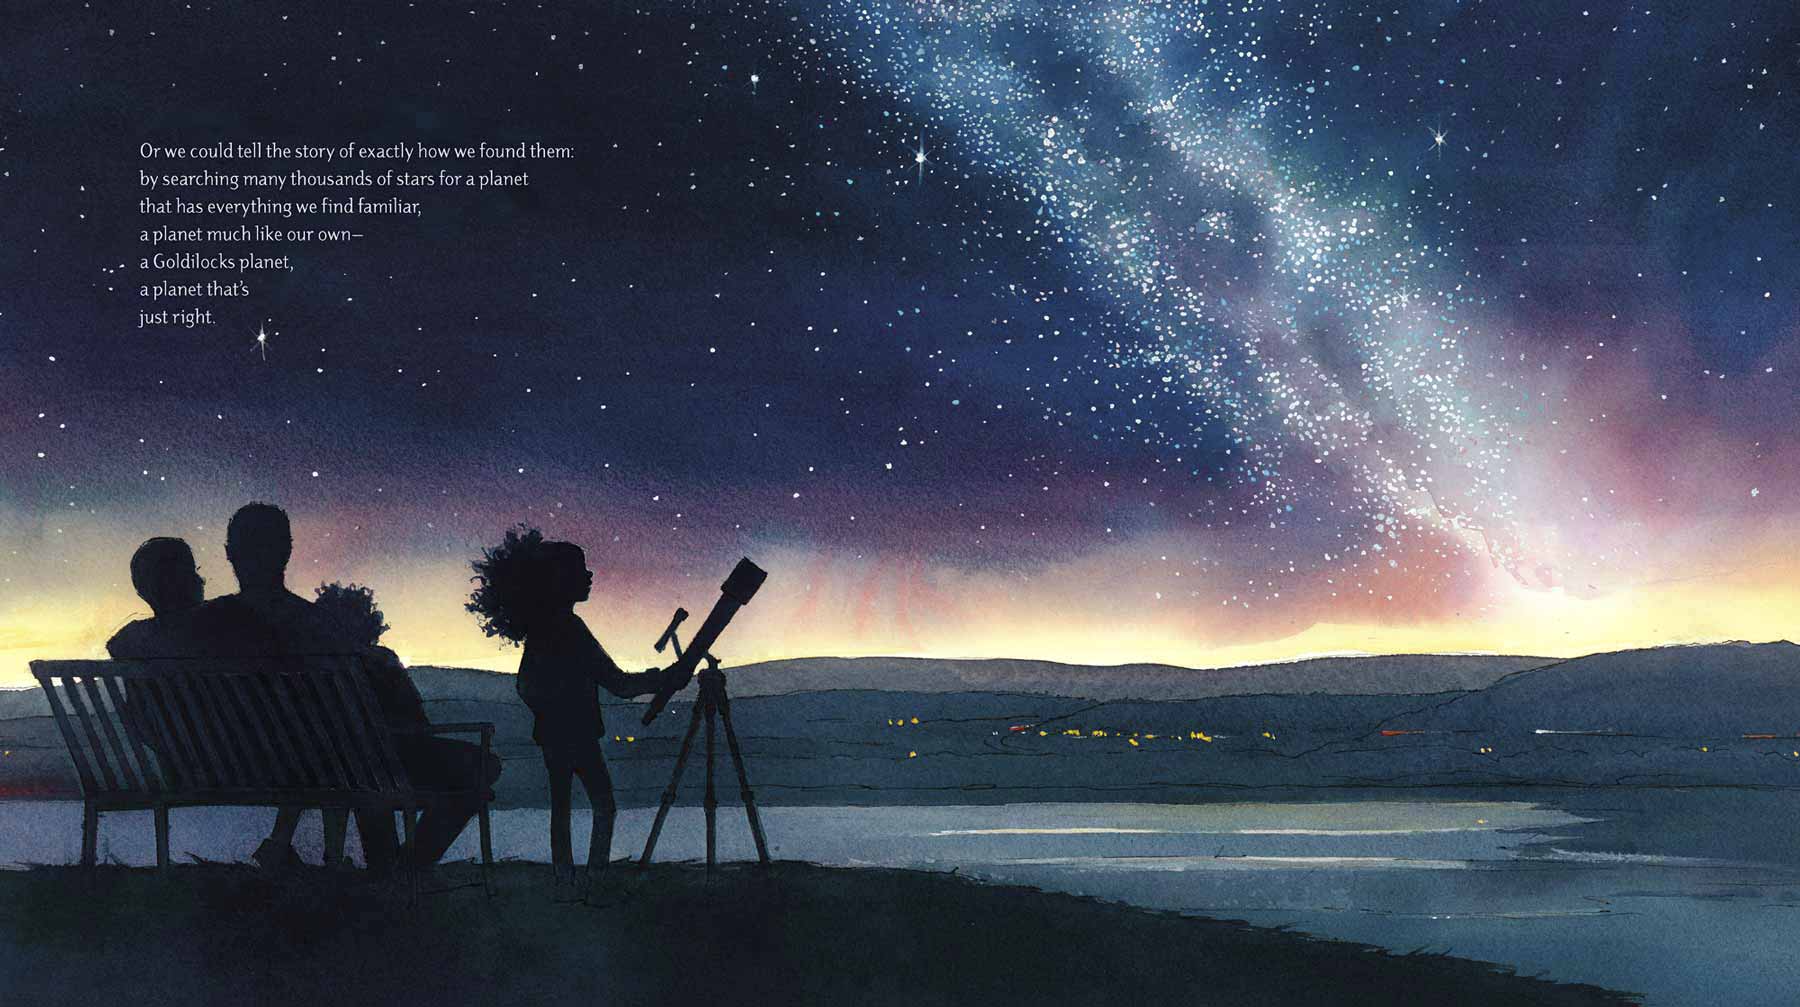 Watercolor Illustration from 'Just Right' showing a family sitting together a bench on a hill at night, while a young girl stands beside a telescope. In the background, we see a night vista with a sky filled by the stars of the milky way.